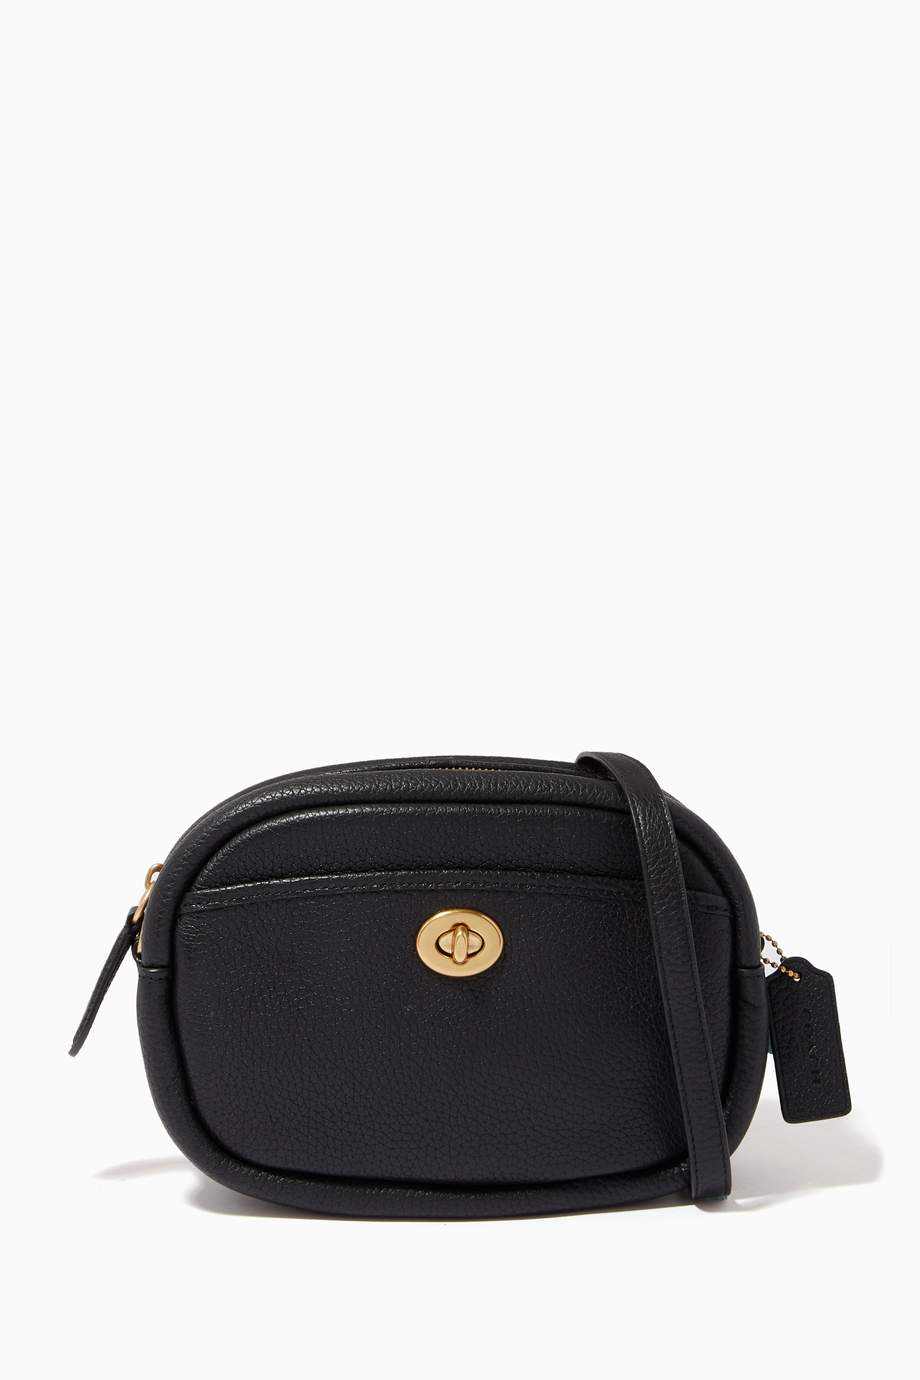 Shop Coach Black Camera Bag in Pebble Leather for Women | Ounass UAE